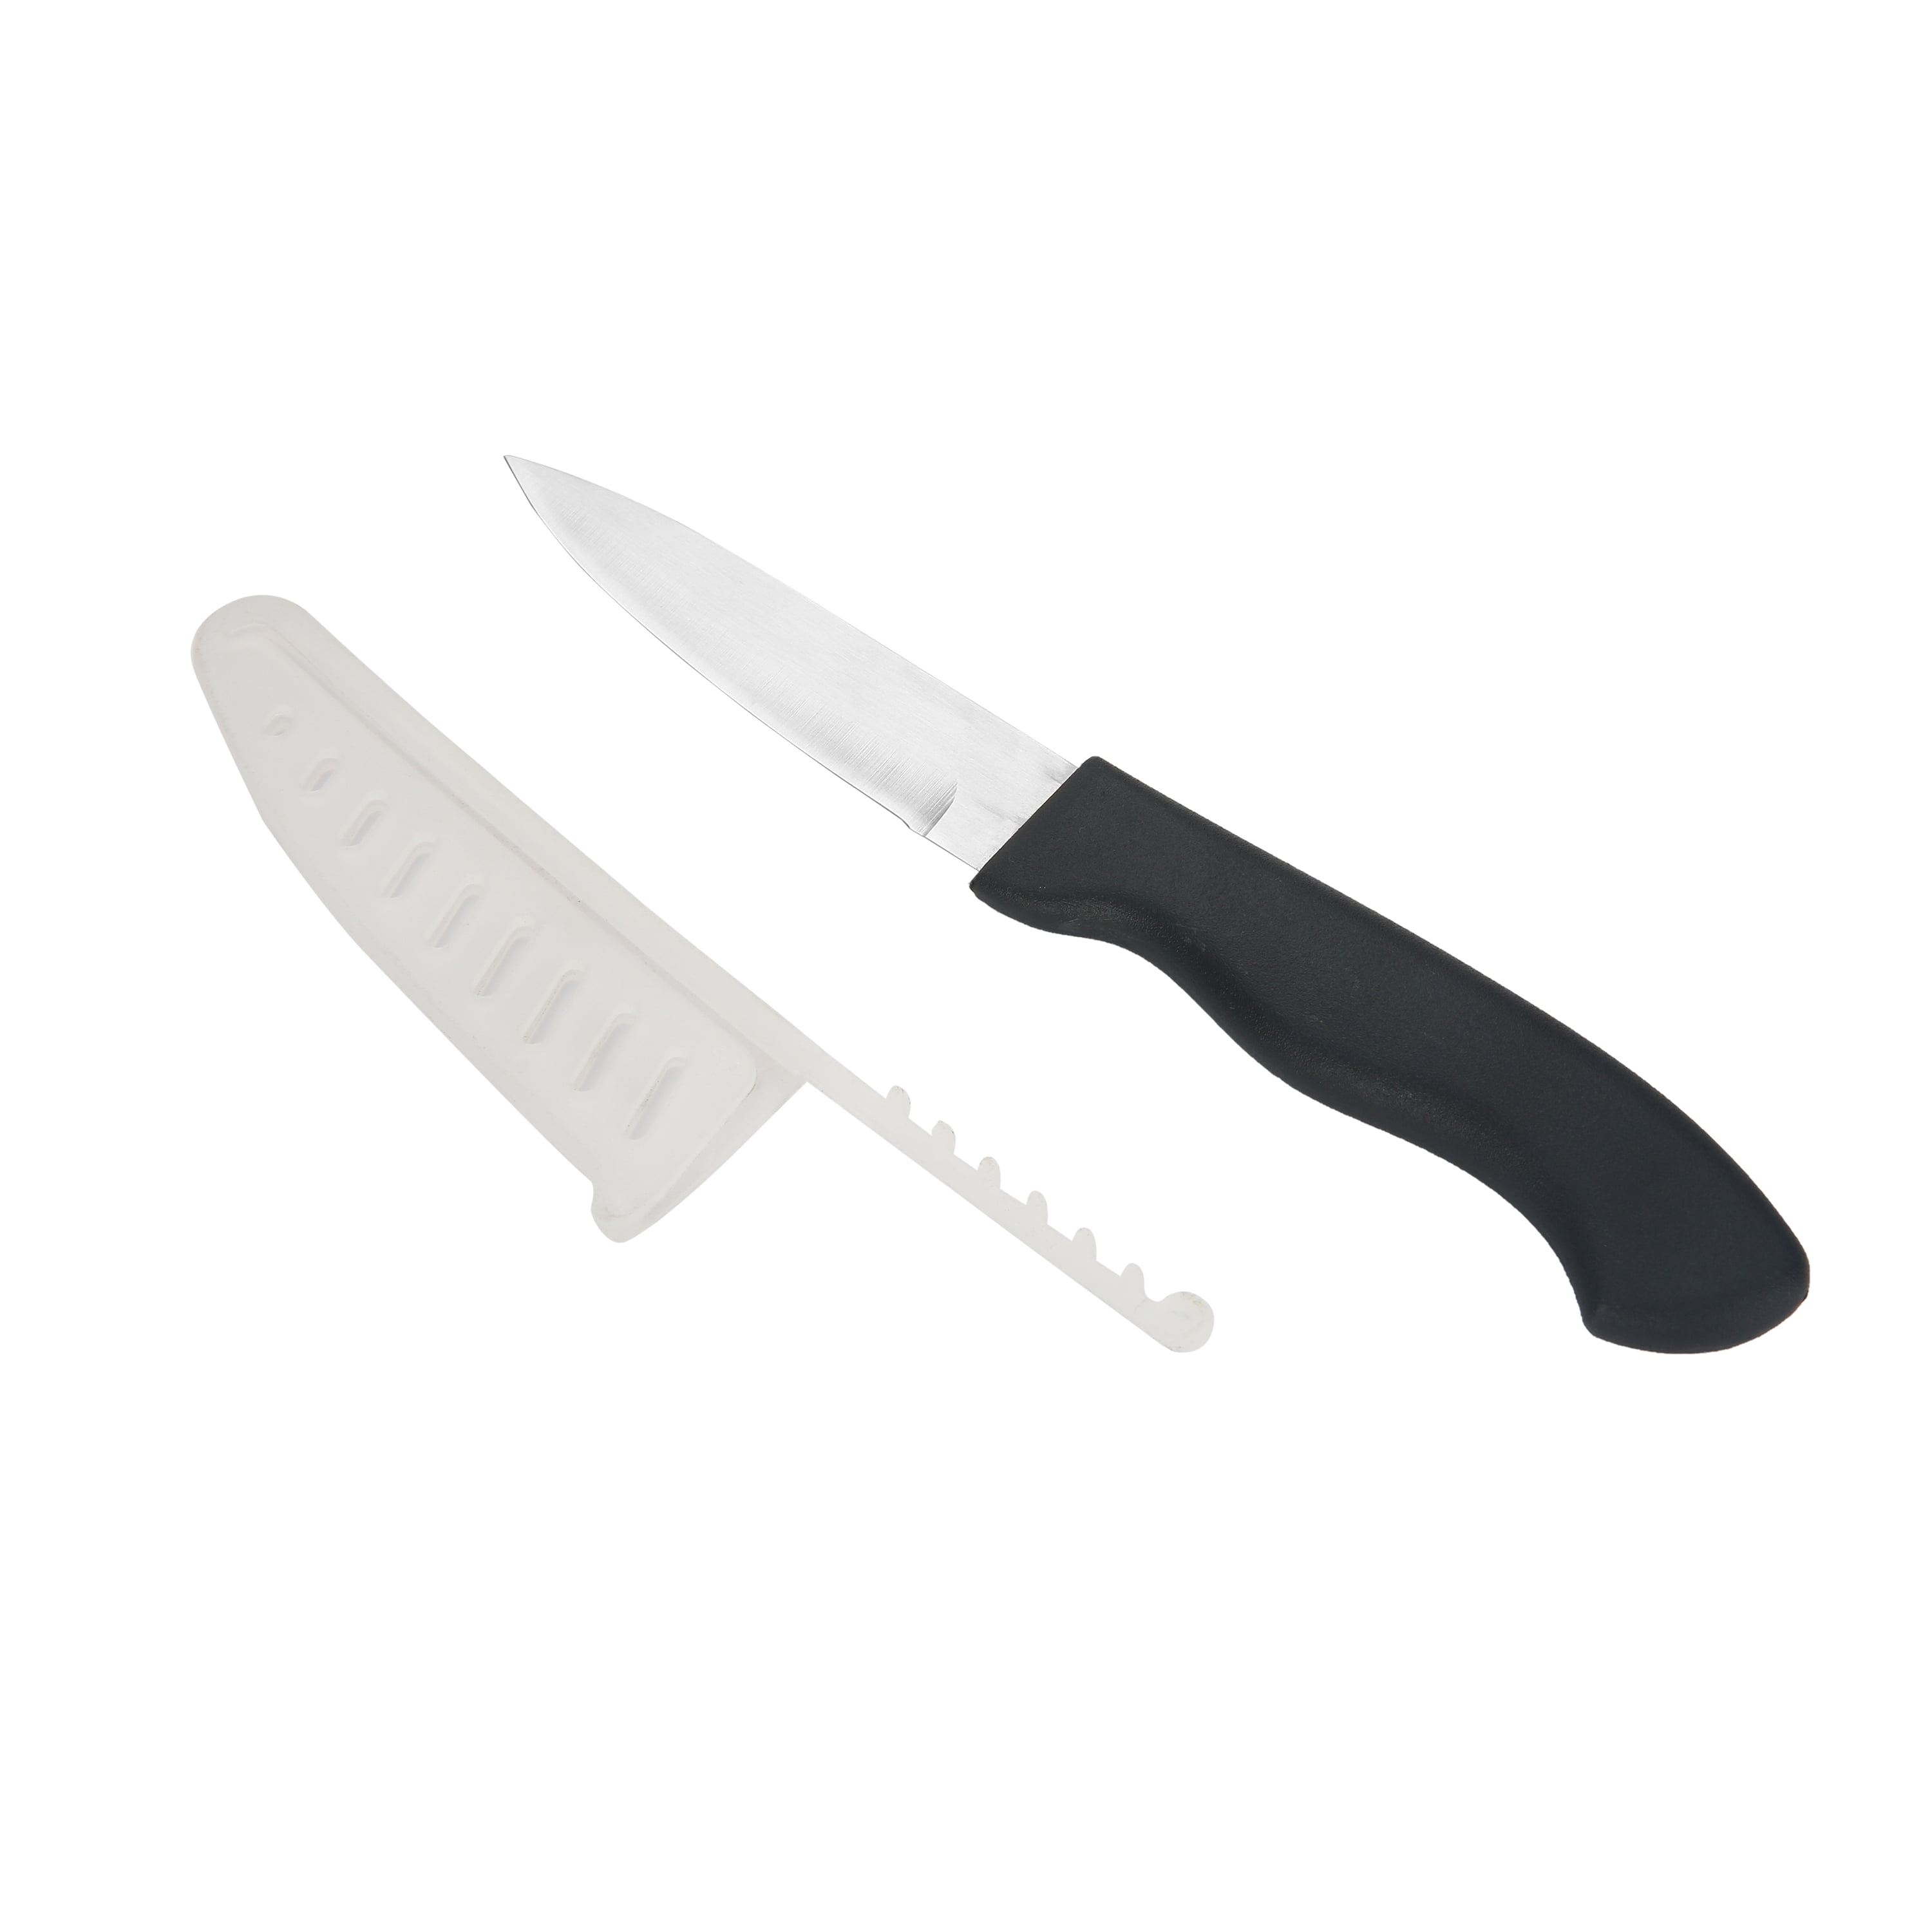 Cutlery-Pro Soft-Grip Handle Serrated Utility Knife, 4in